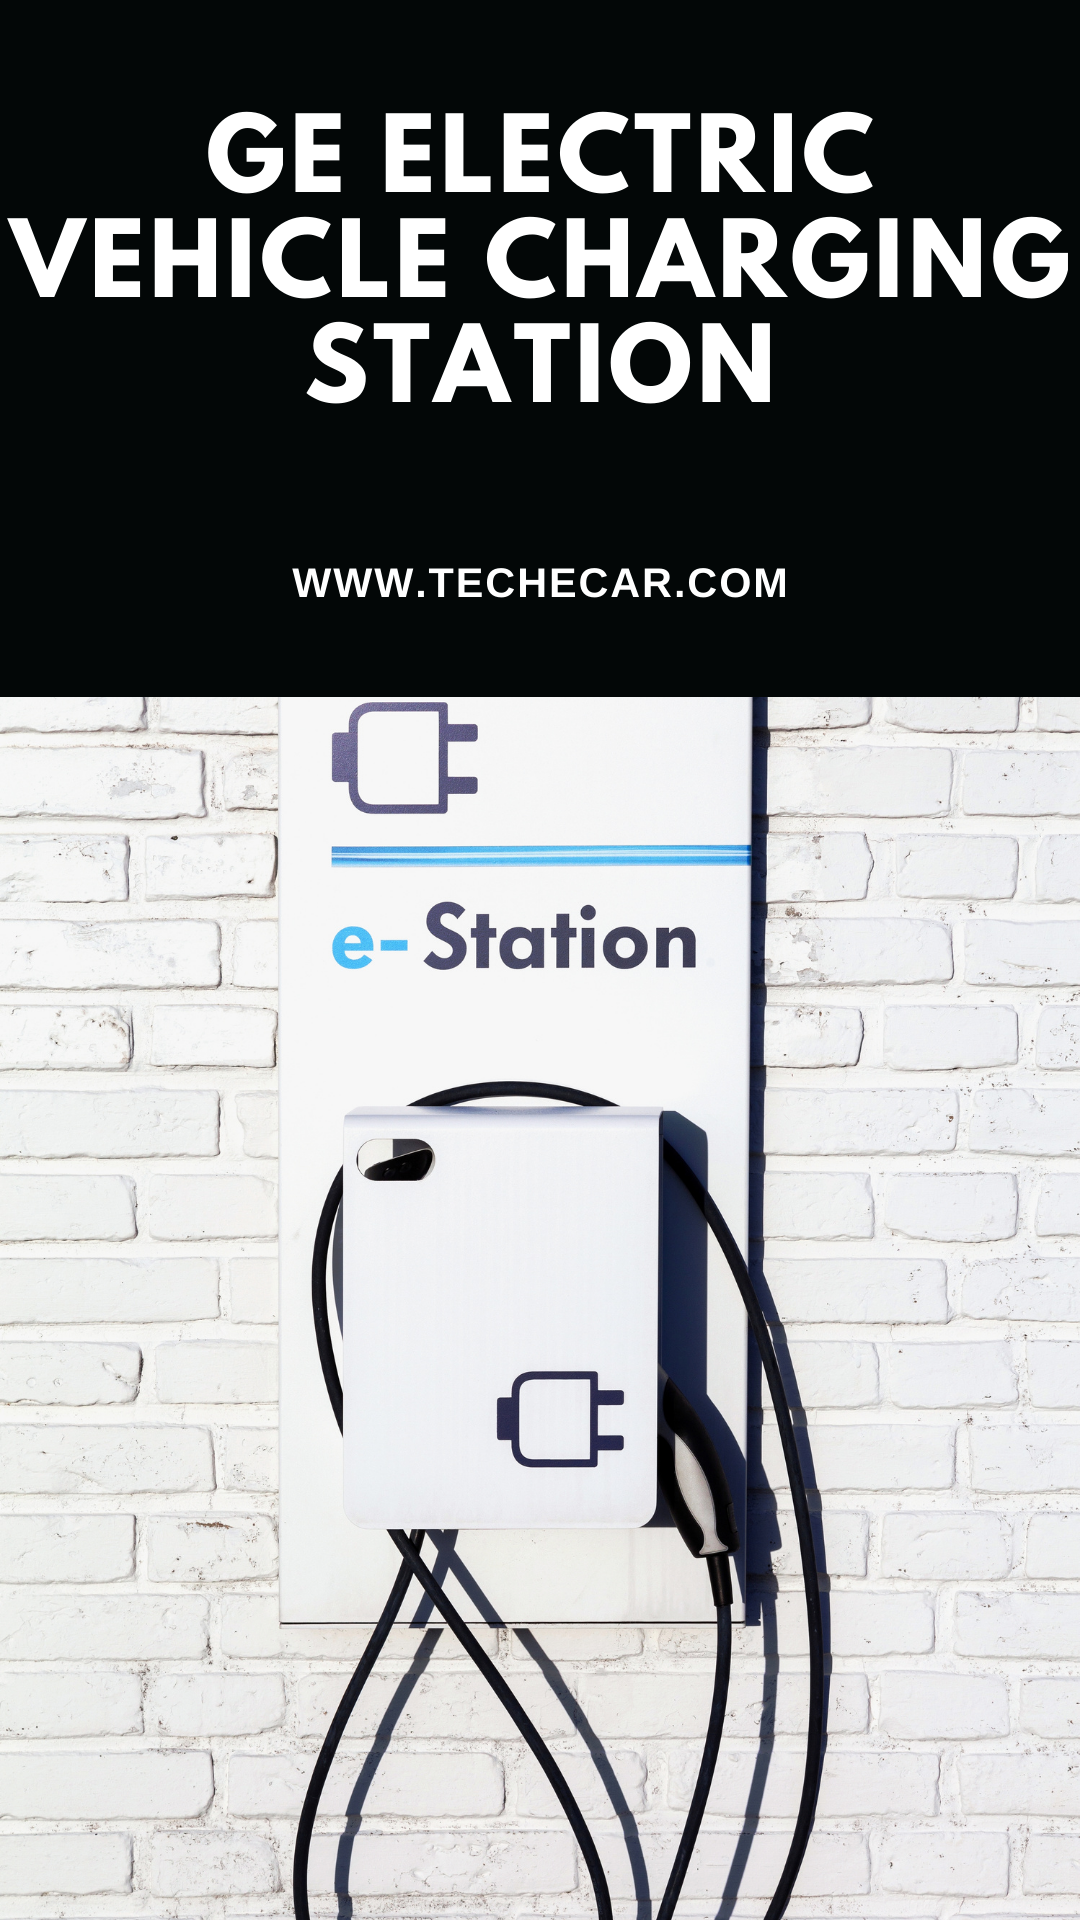 GE Electric Vehicle Charging Station